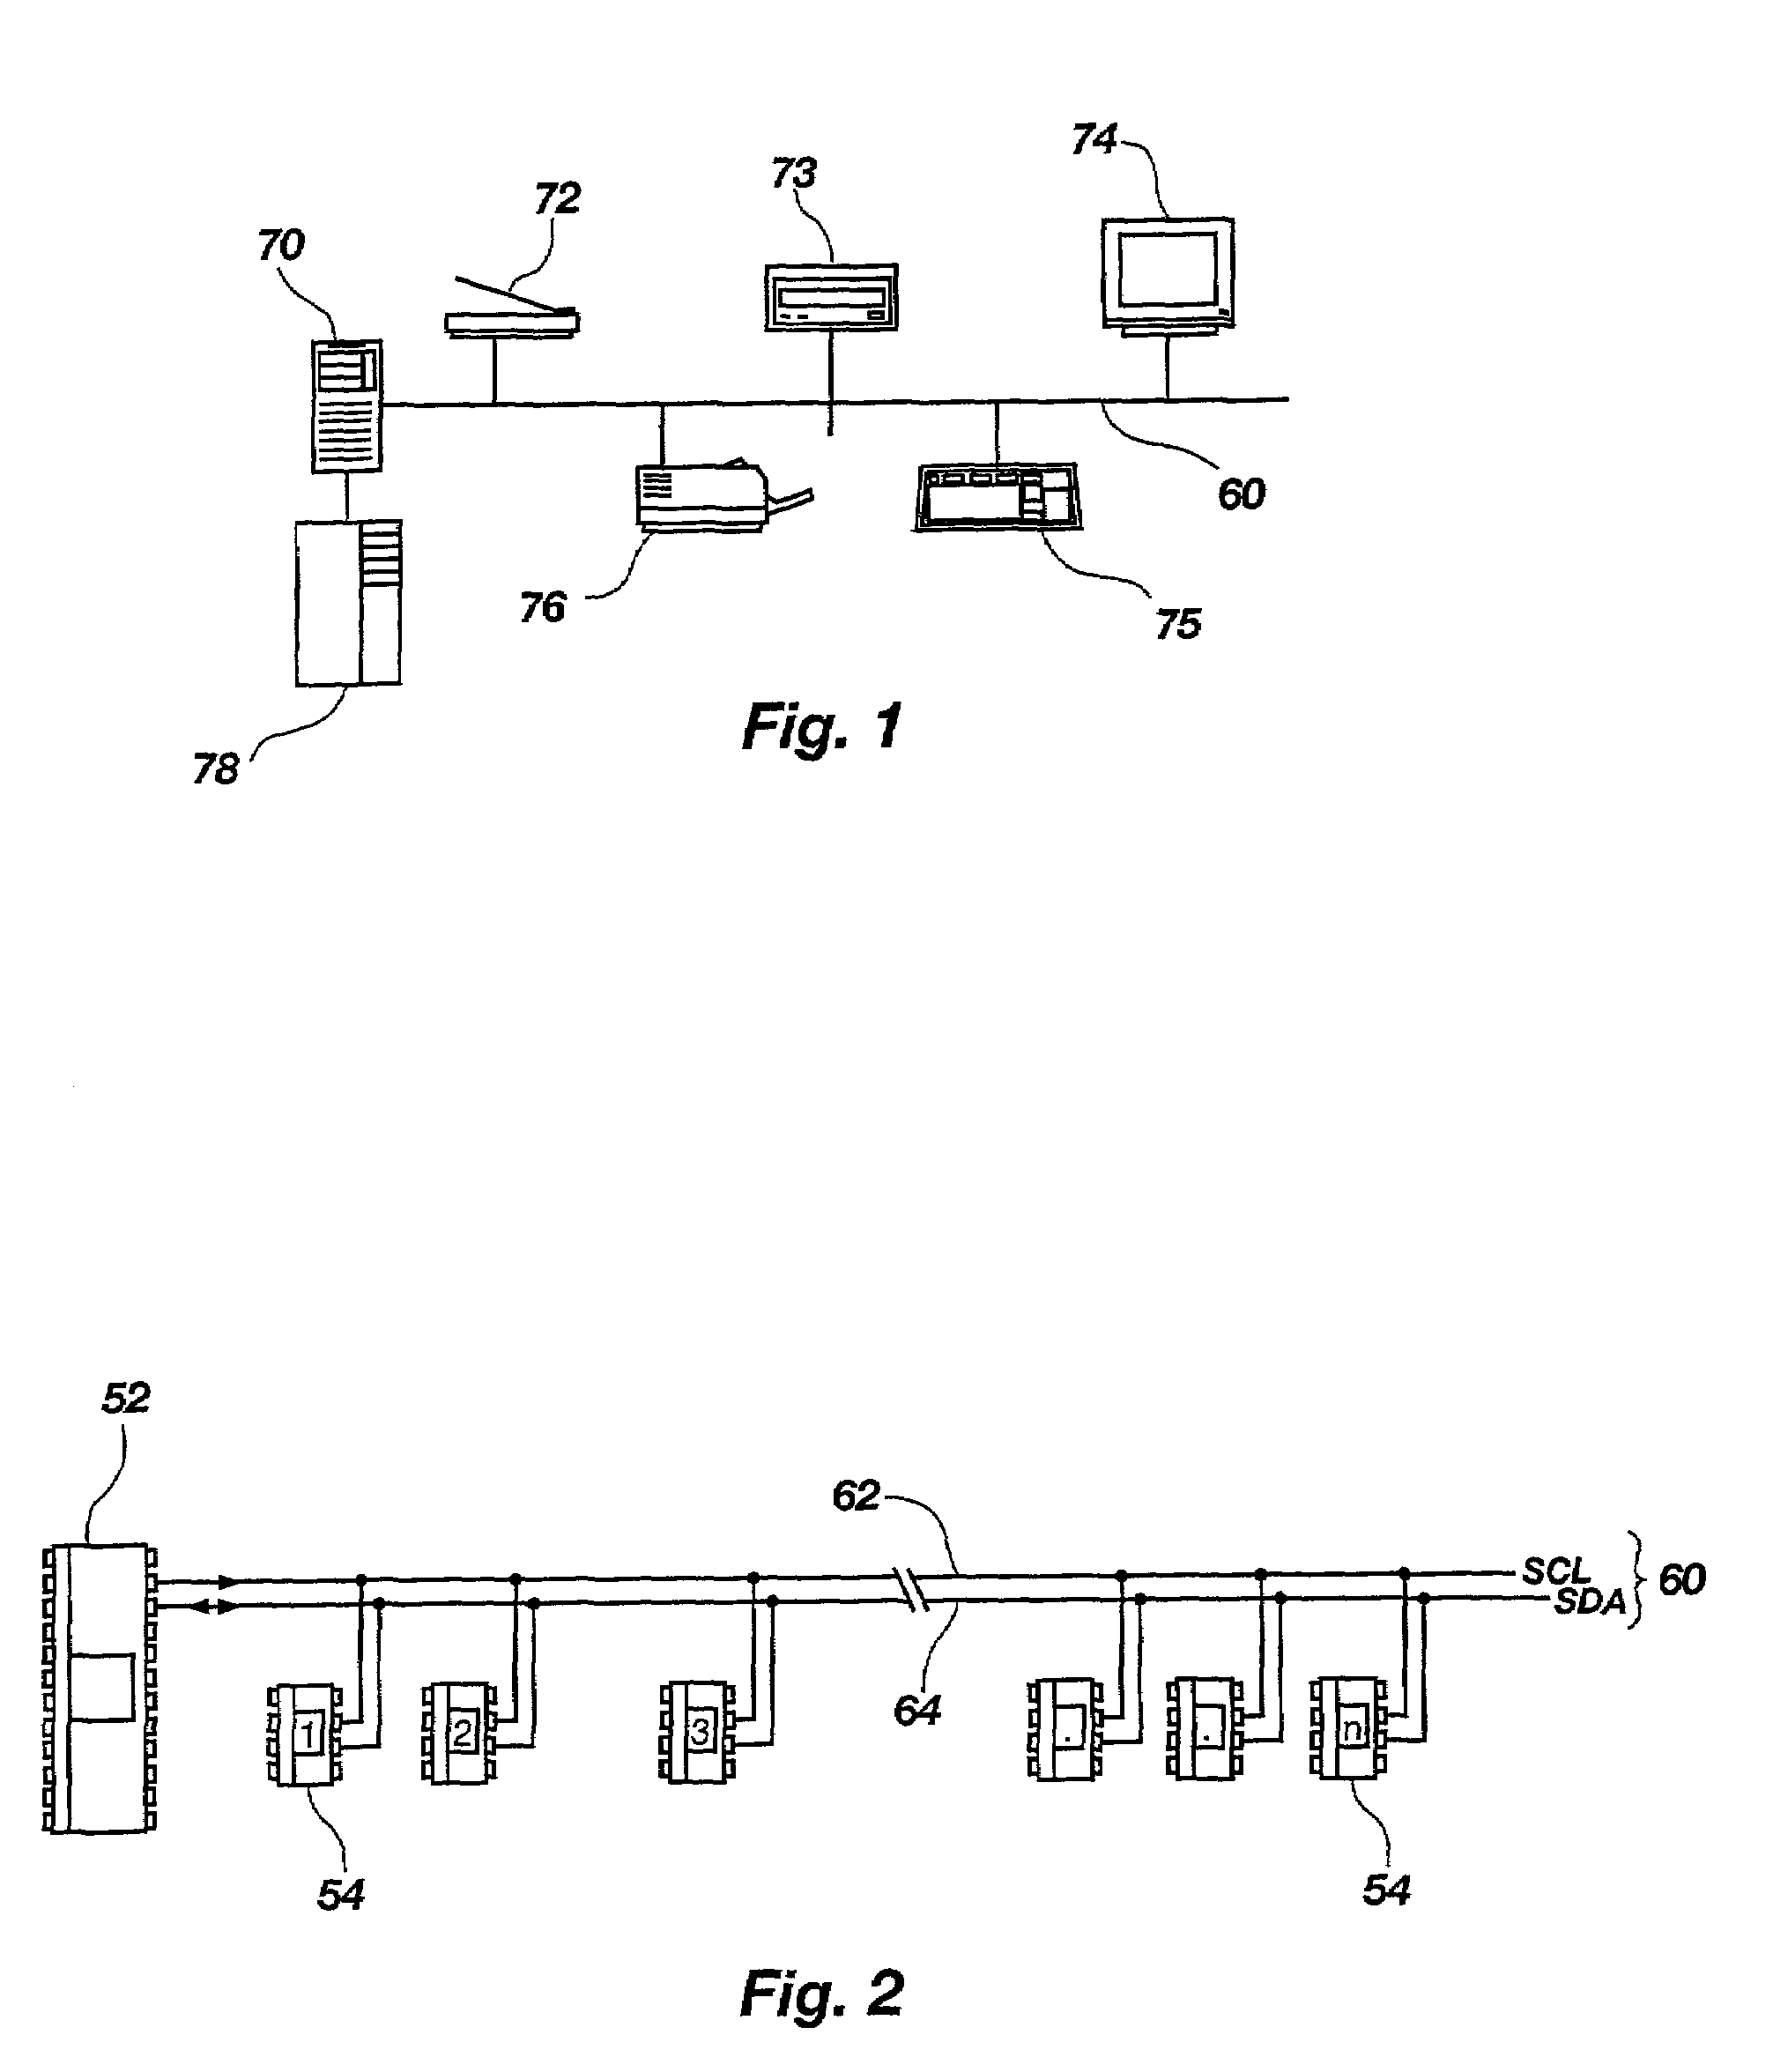 Method and apparatus for connecting devices to a bus